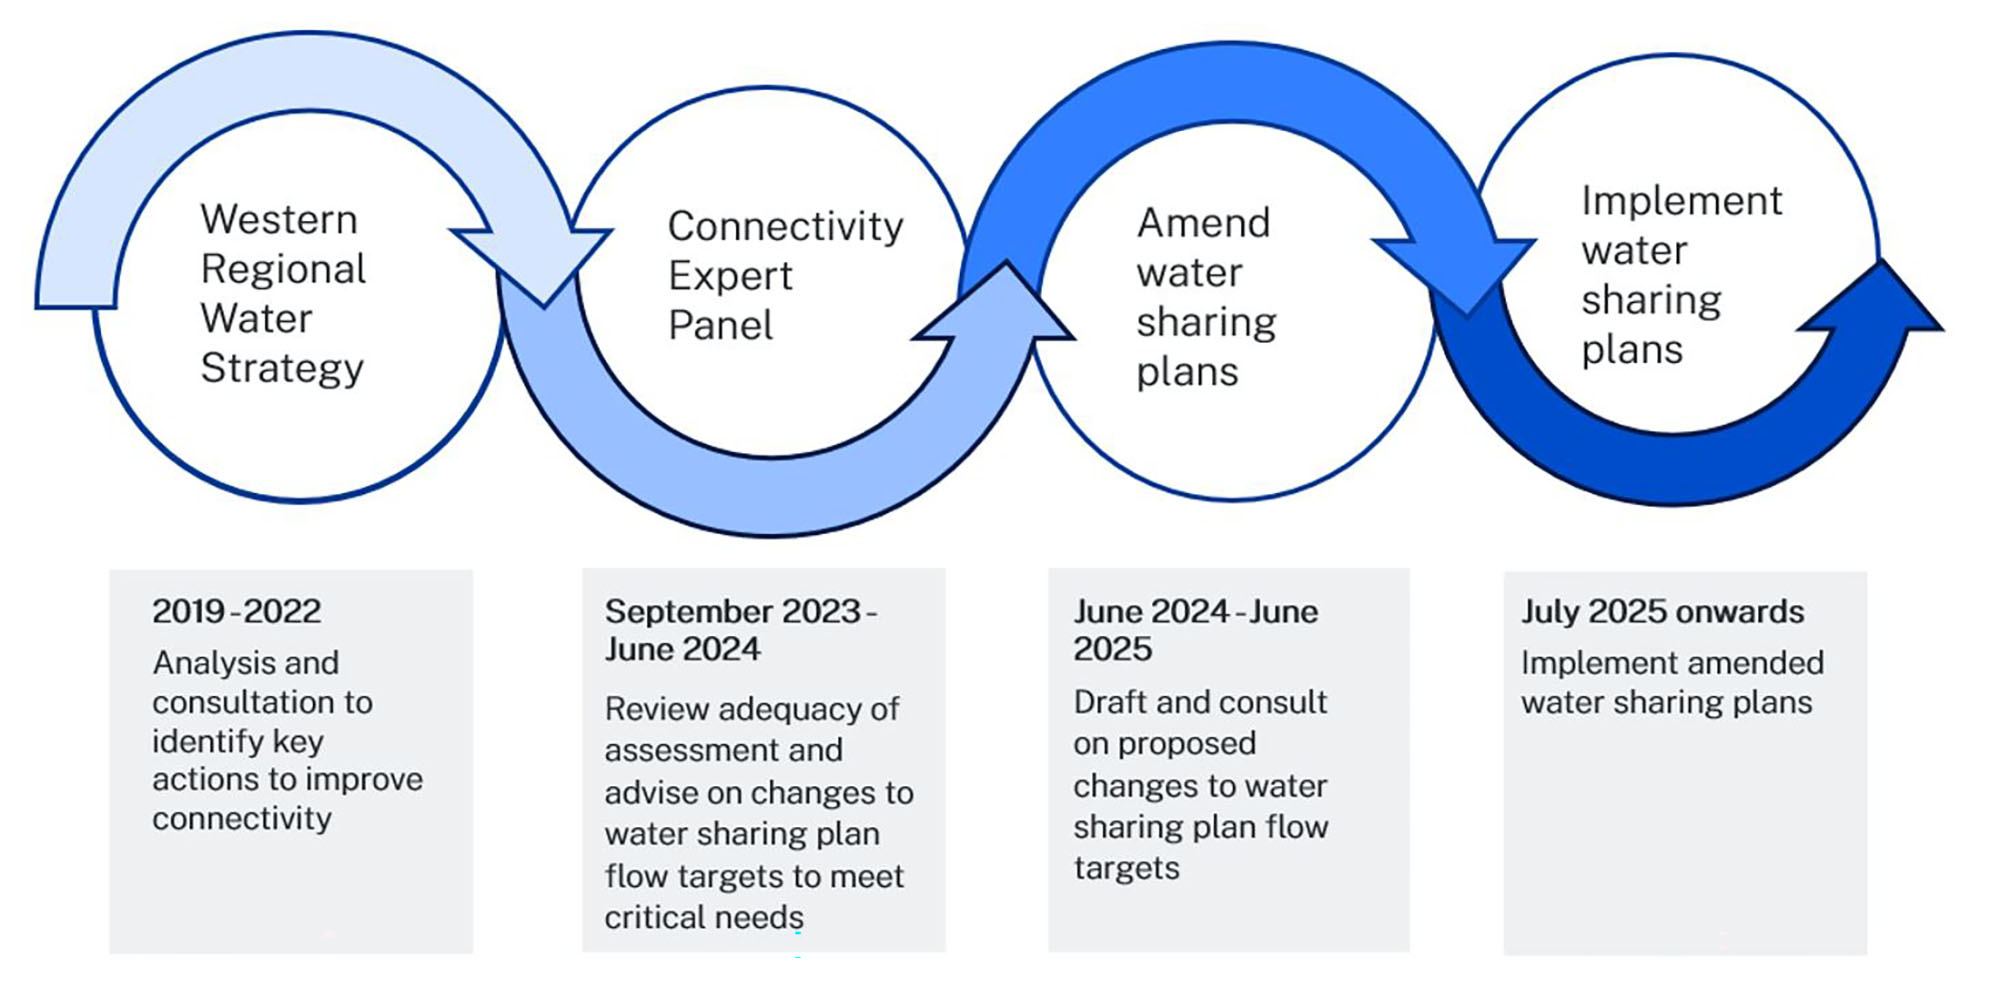 Western Regional Water Strategy with arrowing flowing to Connectivity Expert Panel with arrow flowing to Amend Water Sharing Plans with arrow flowing to Implement Water Sharing Plans. 